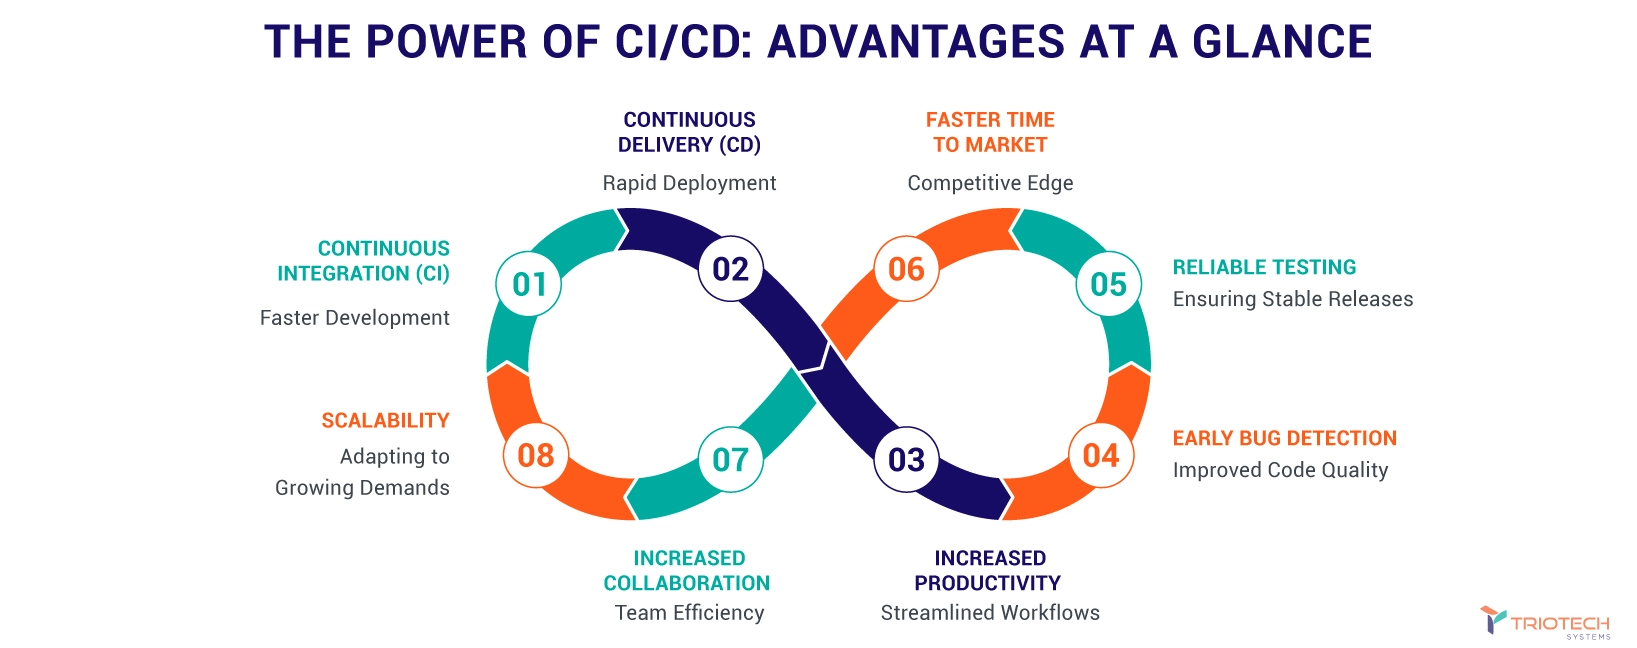 introducing cicd: the advantages of ci/cd